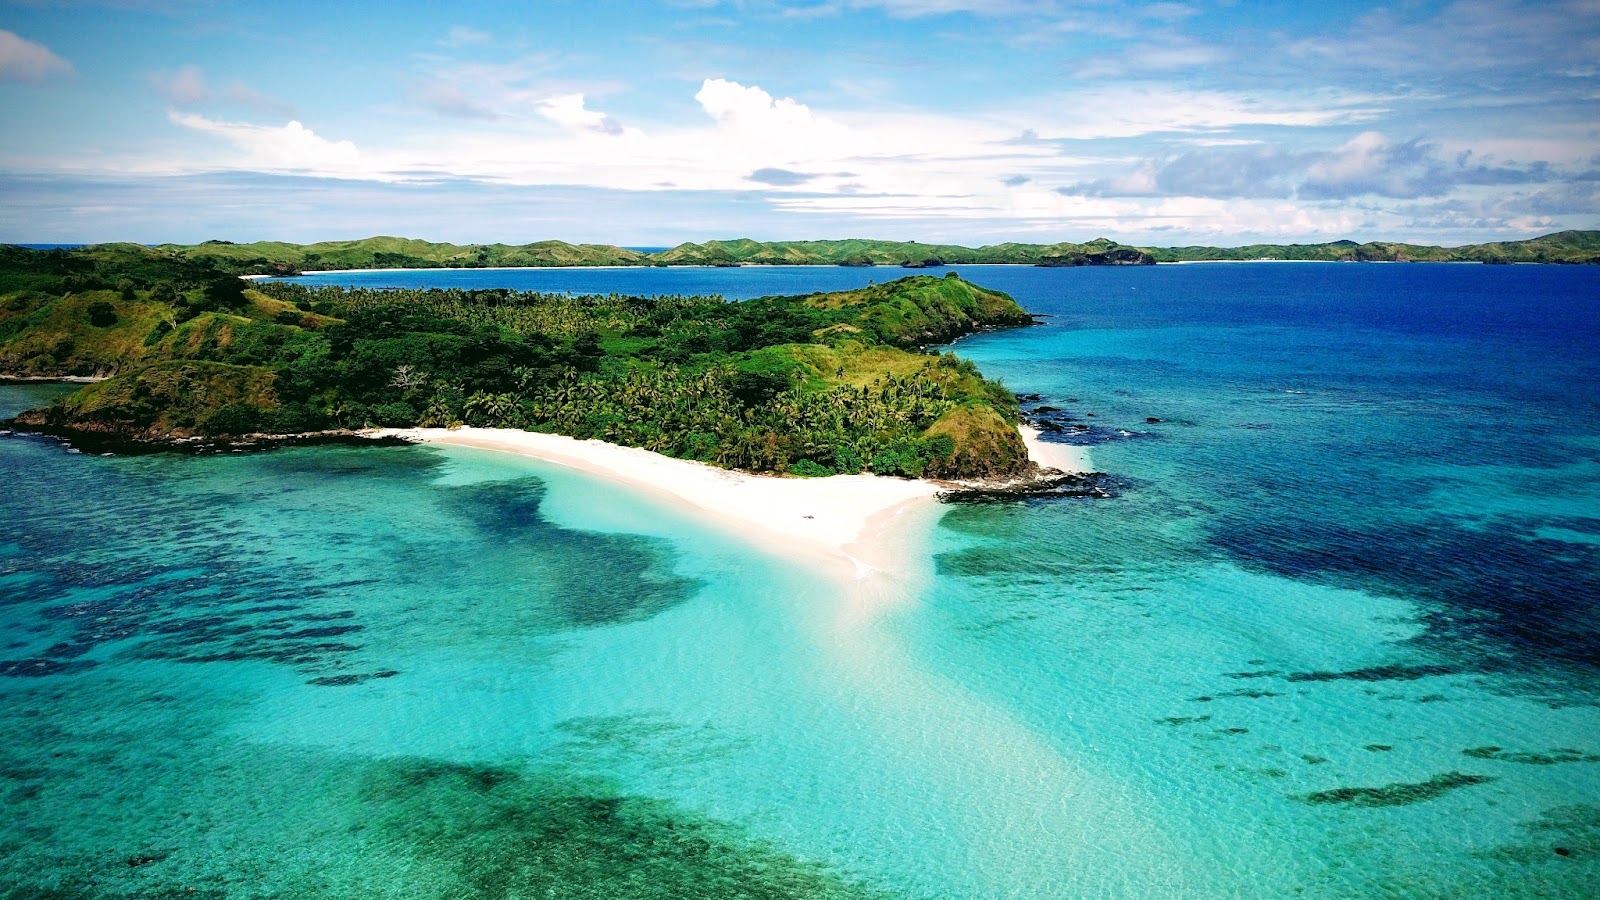 An aerial photograph showcasing the scenic beauty of the Yasawa Islands, with turquoise waters, lush greenery, and sandy beaches.